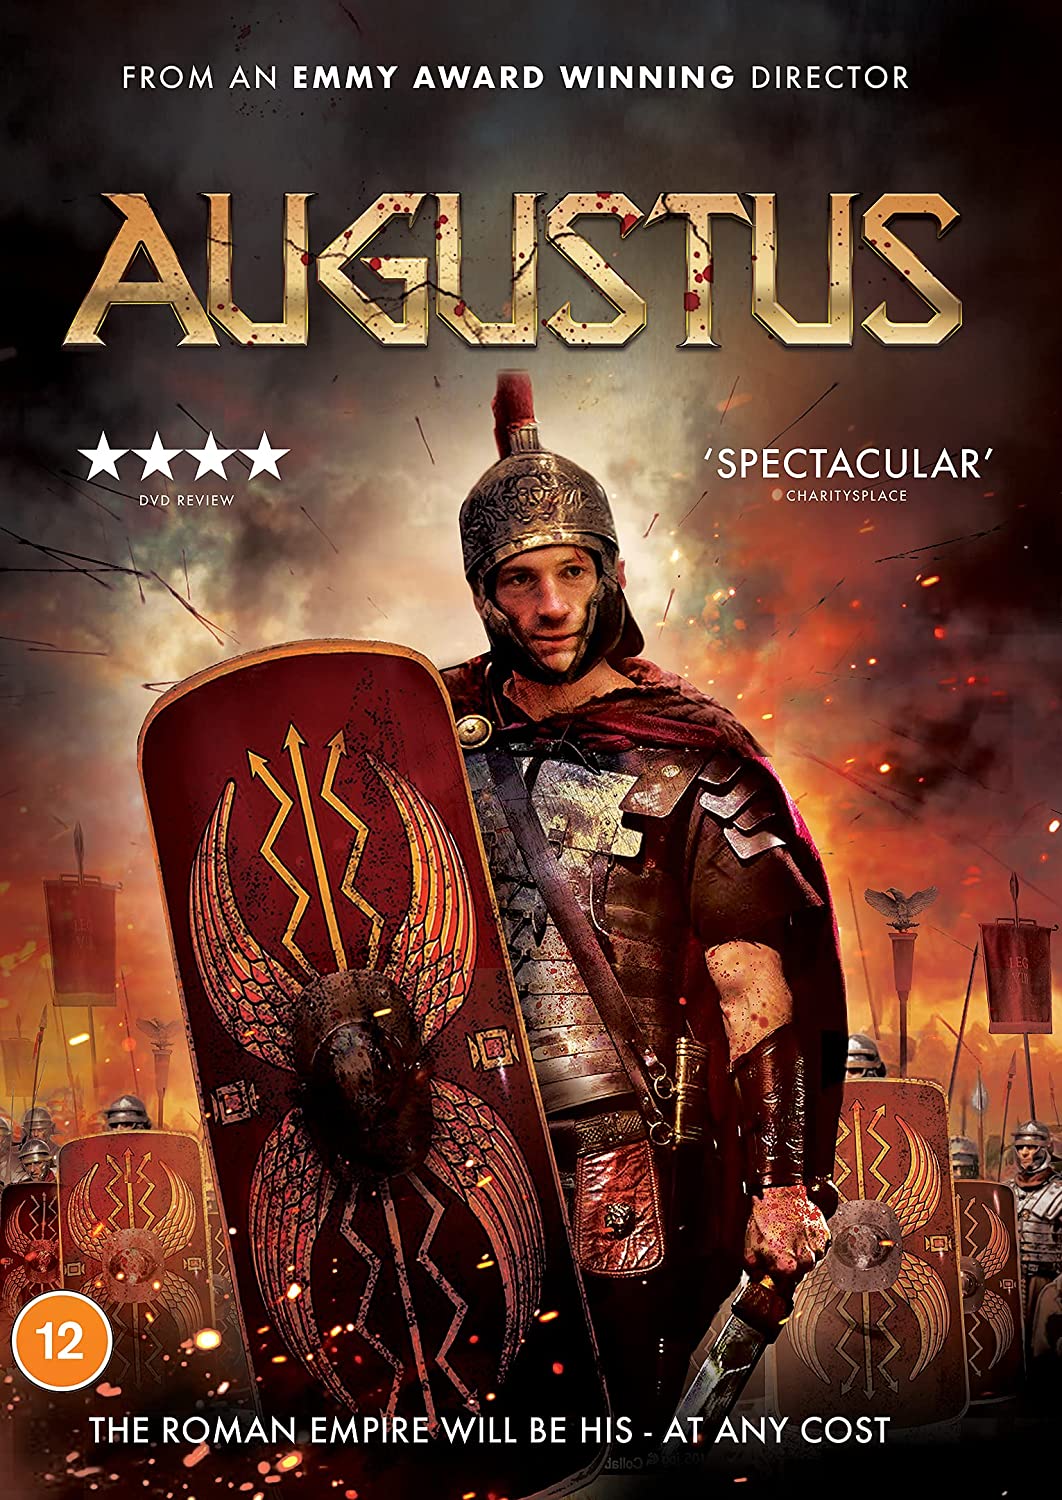 Augustus - The Roman Empire will be his at any cost - From an Emmy Award Winning Director [DVD]